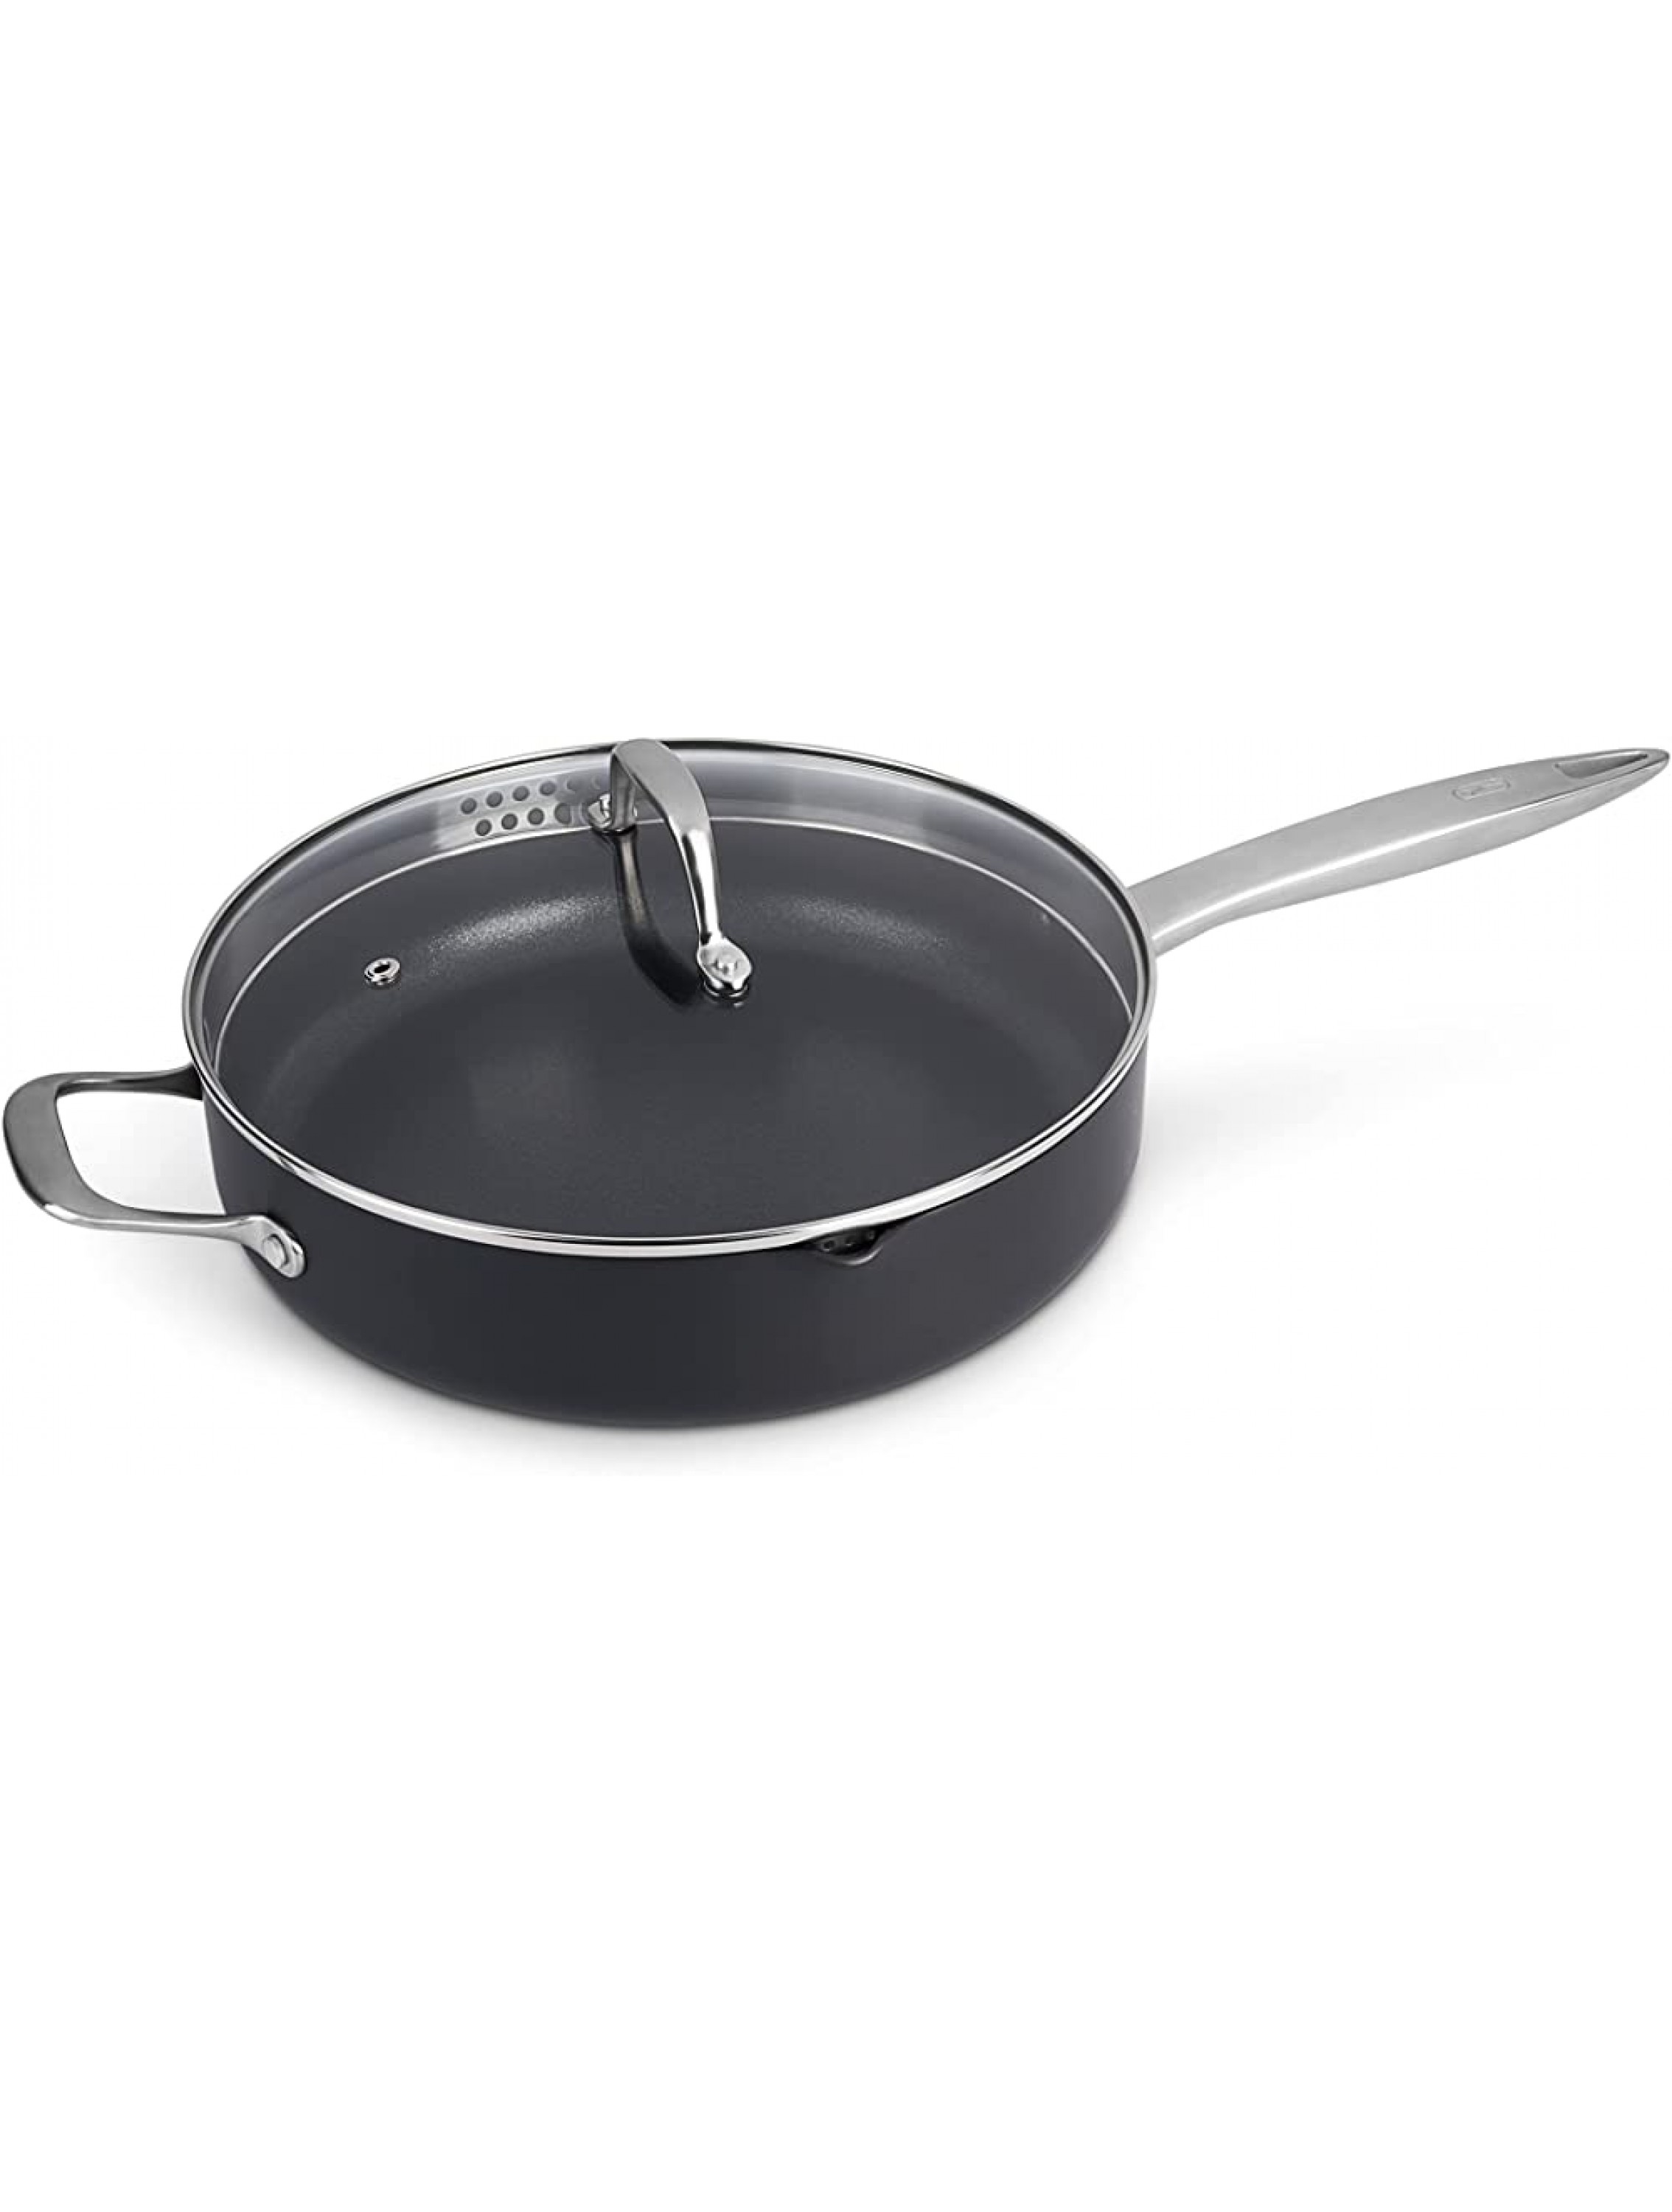 Zyliss Ultimate Pro Nonstick Saute Pan 11 Hard Anodized Cookware with Pour Spout - BYYDHKZZD